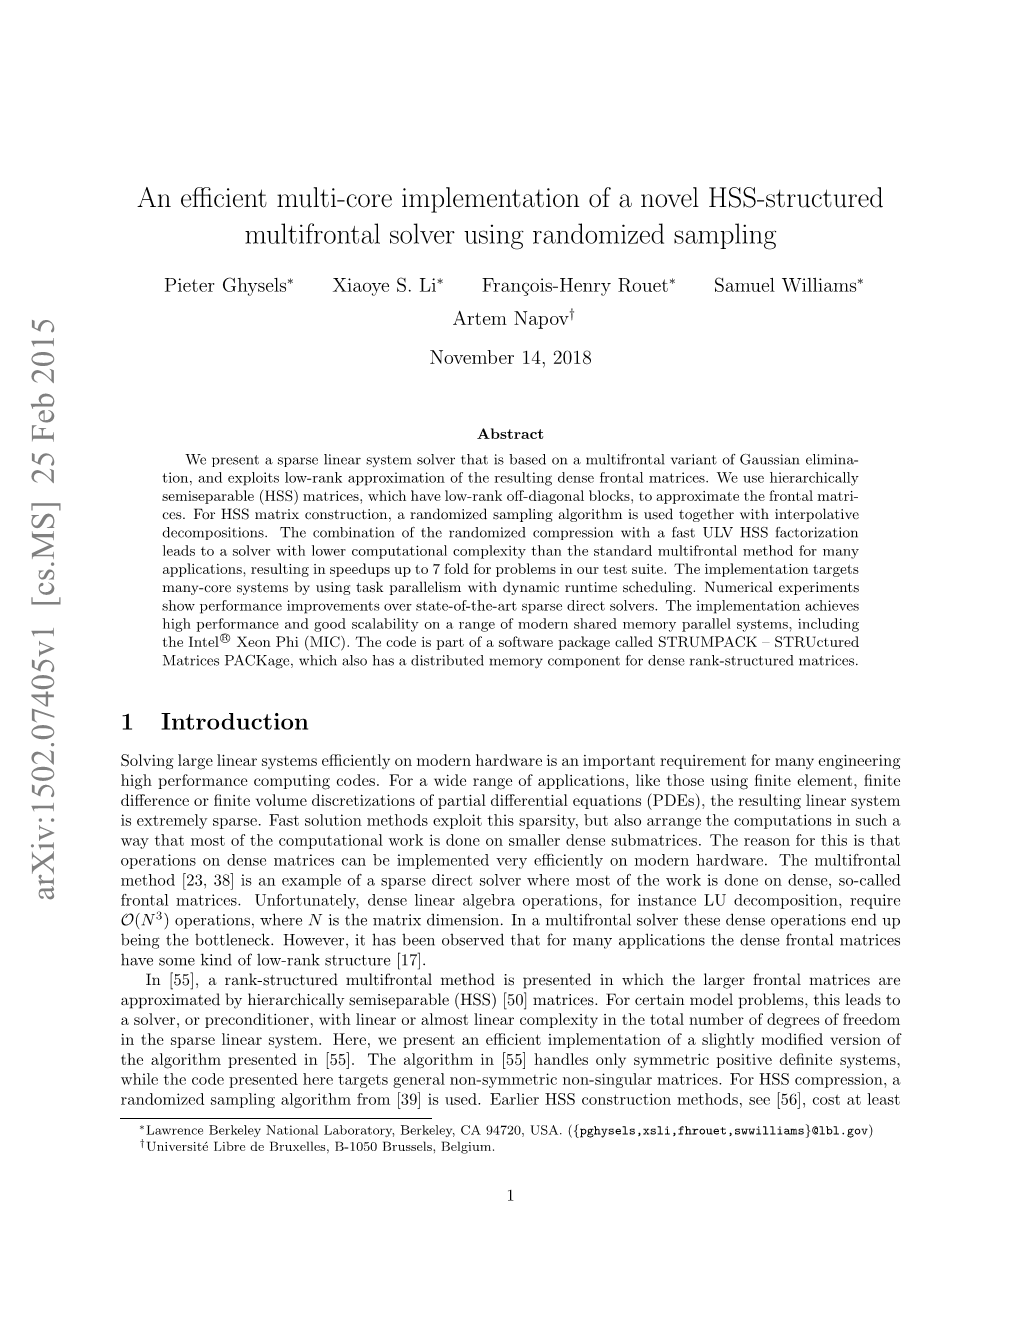 An Efficient Multi-Core Implementation of a Novel HSS-Structured Multifrontal Solver Using Randomized Sampling